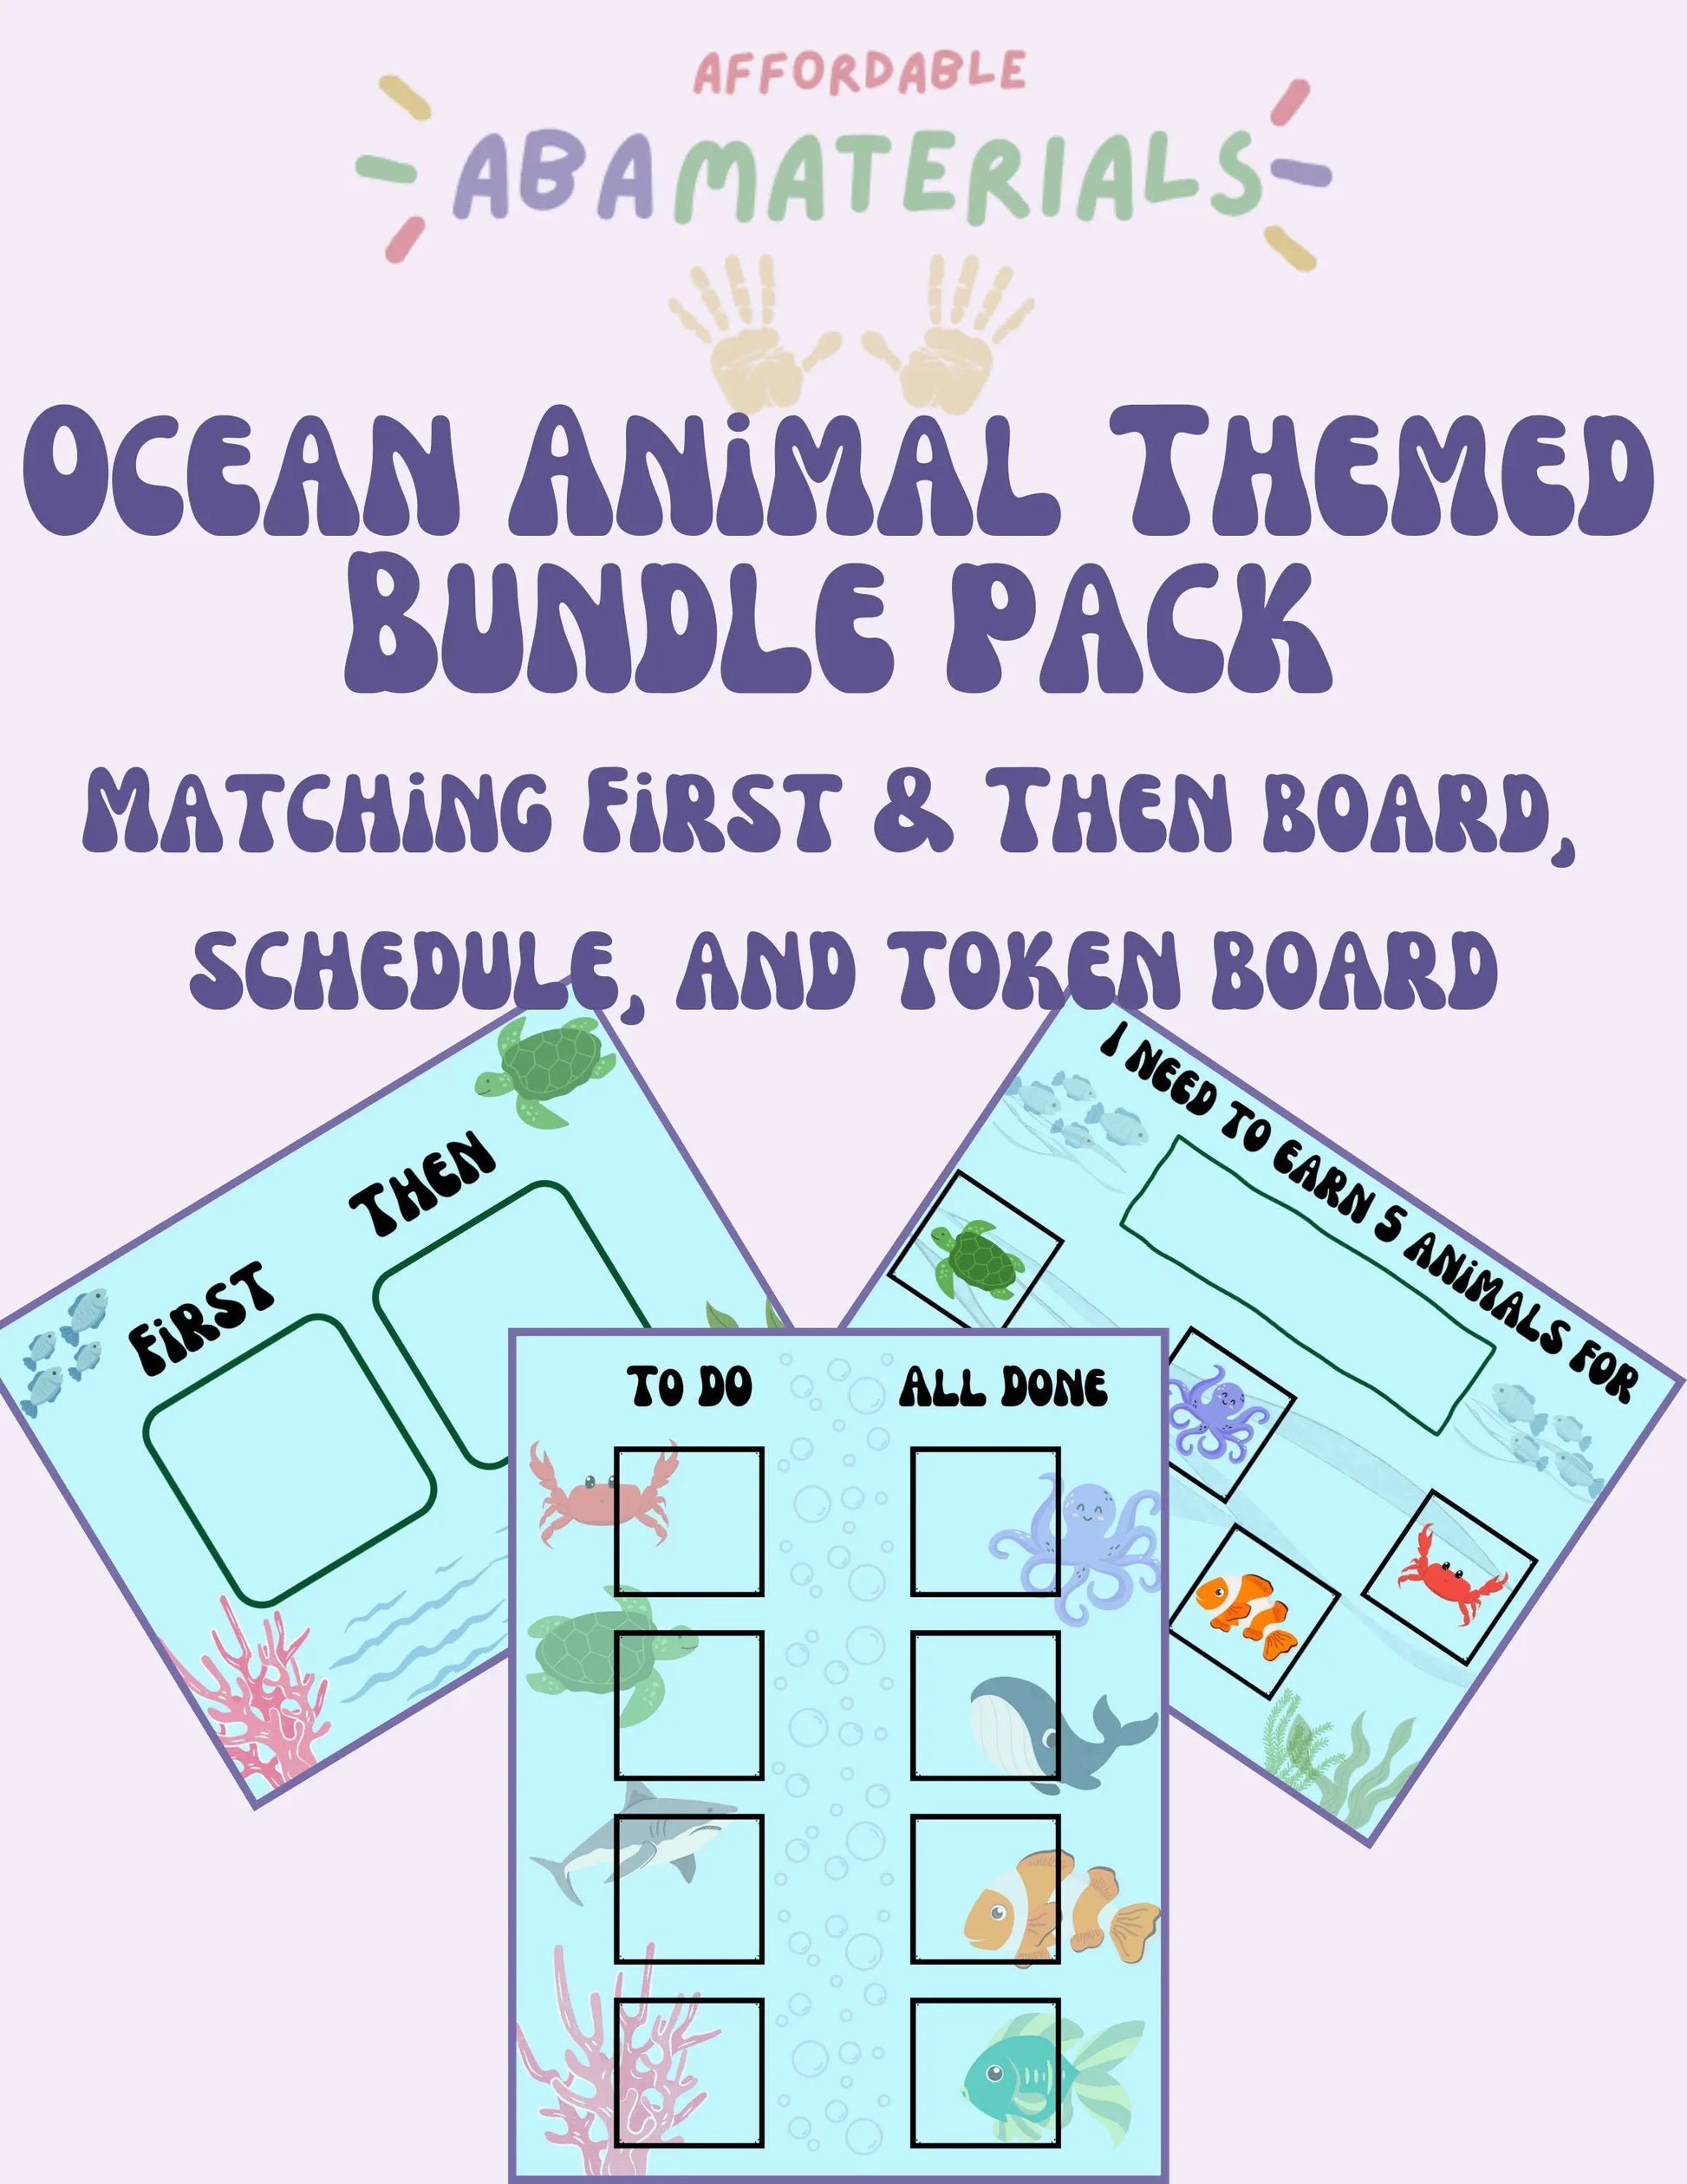 Adorable Ocean Animal Bundle Pack: Printable MEGA Bundle with Matching First-Then Board, Schedule, and Token Board Perfect for Kids or Adult My Store